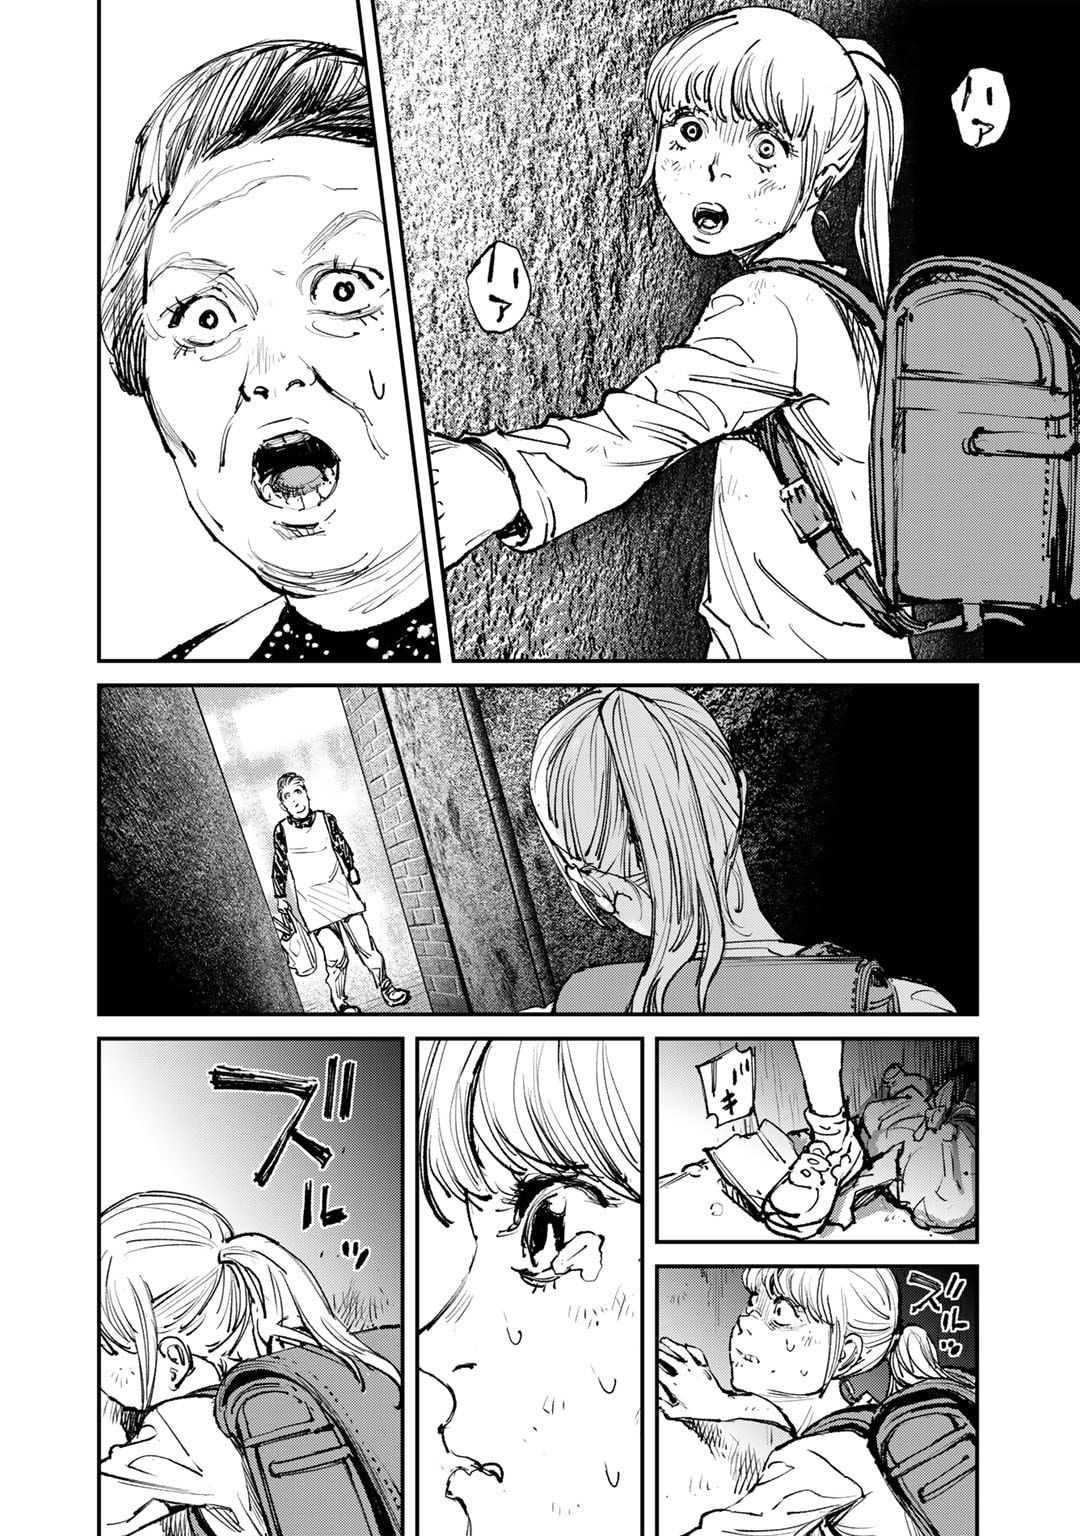 Kanata Is Into More Darker - Chapter 5 - Page 2